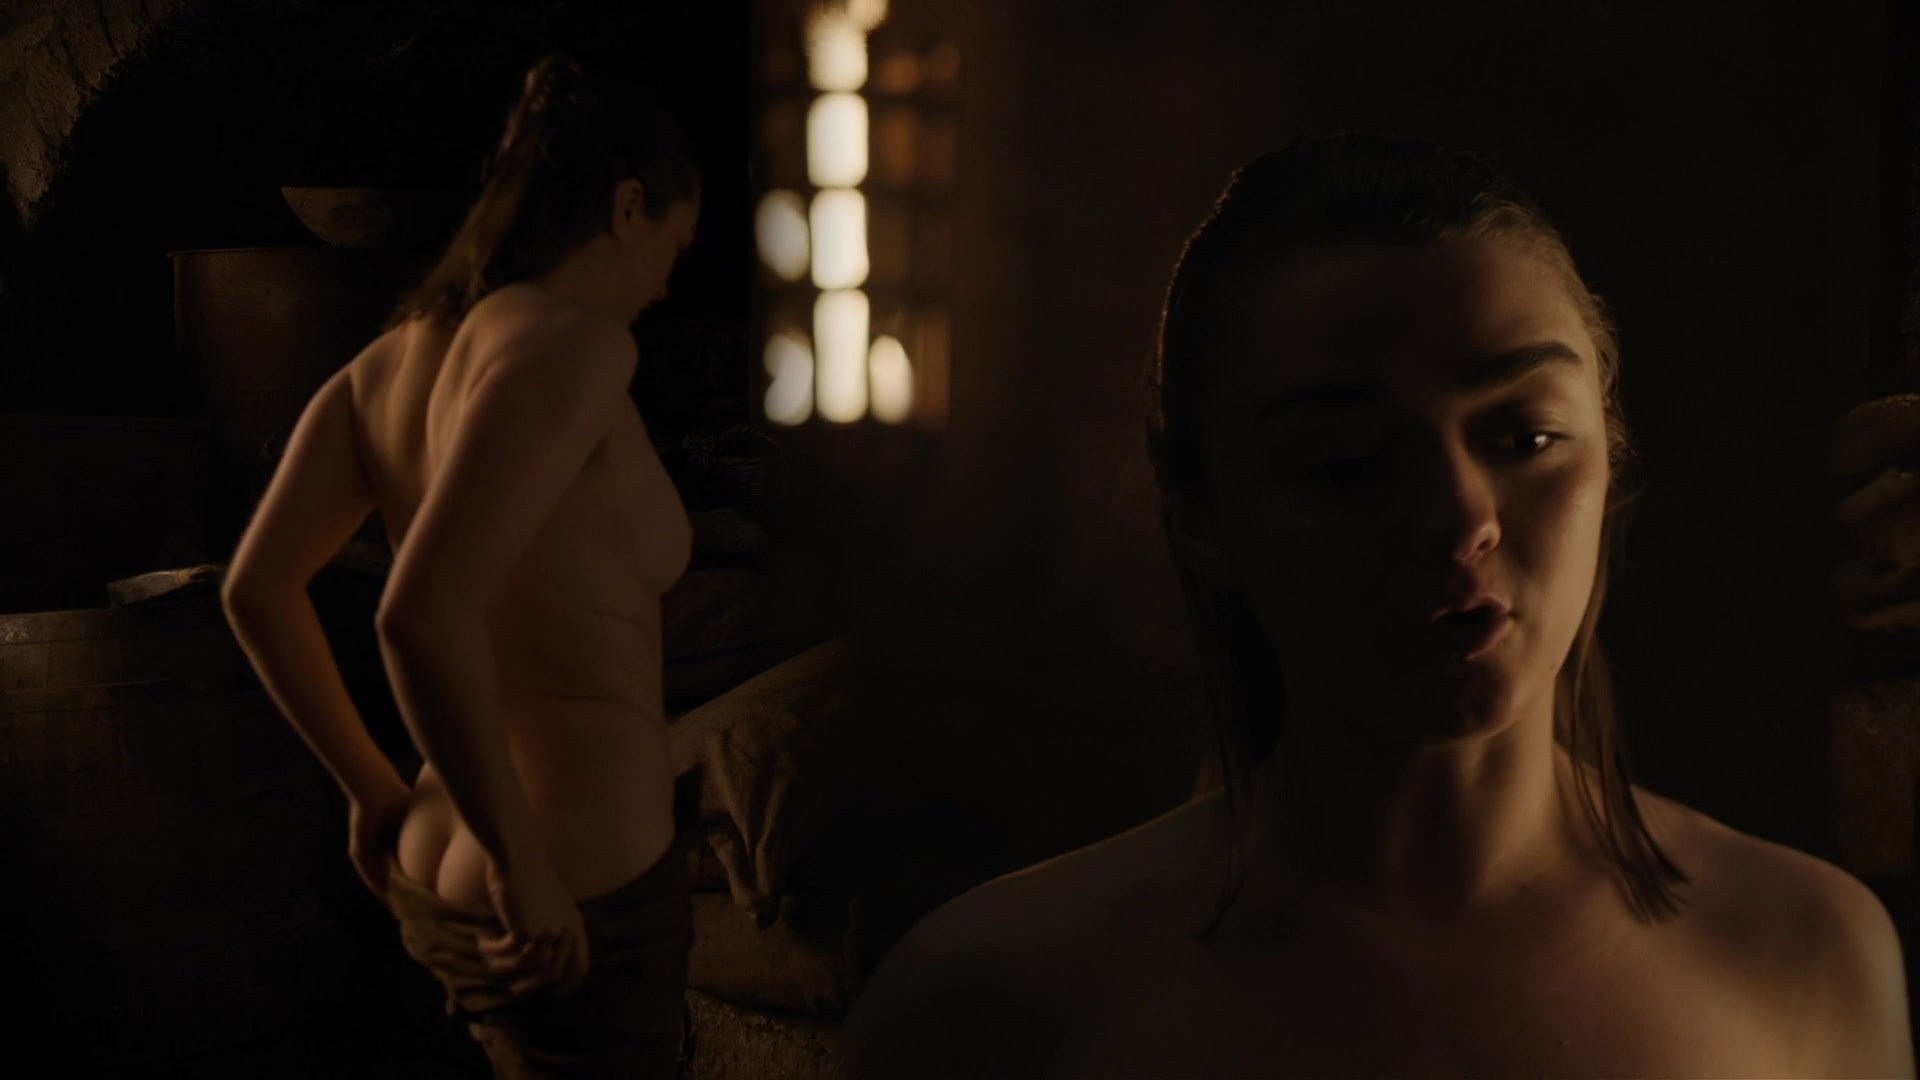 naked sex scene from game of thrones, maisie williams nude leaked photos ar...